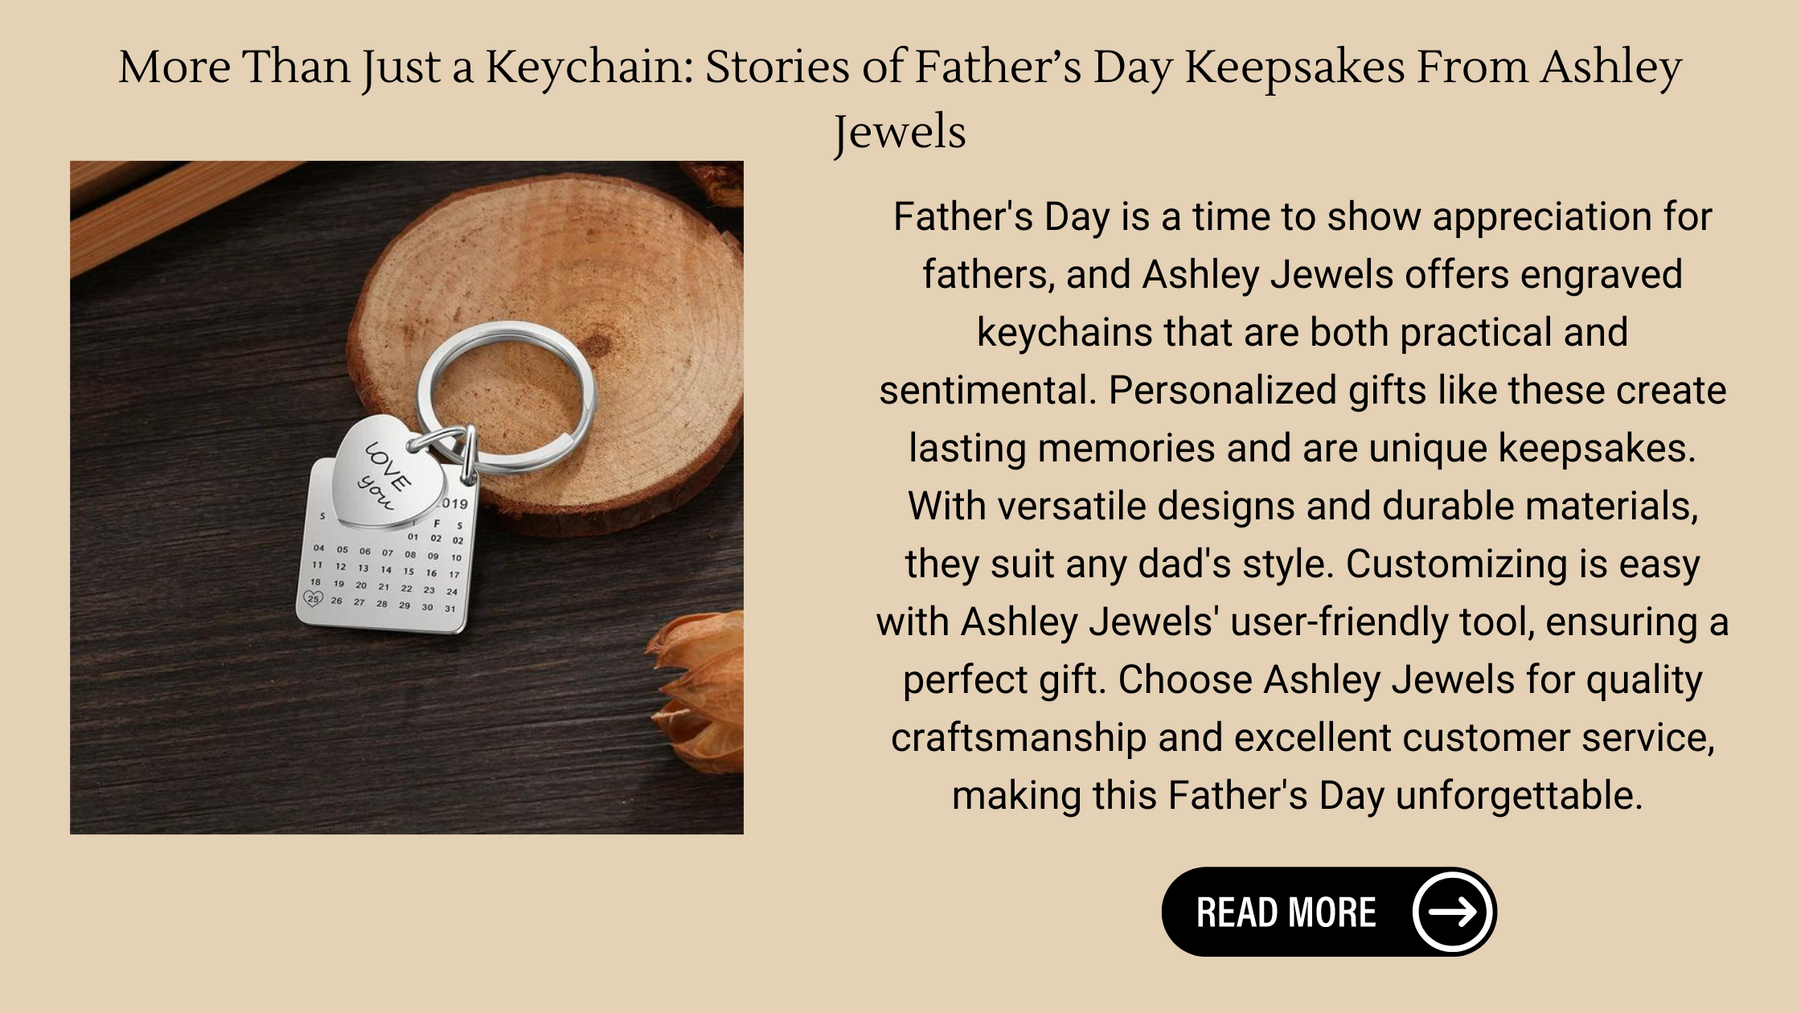 More Than Just a Keychain: Stories of Father’s Day Keepsakes From Ashley Jewels